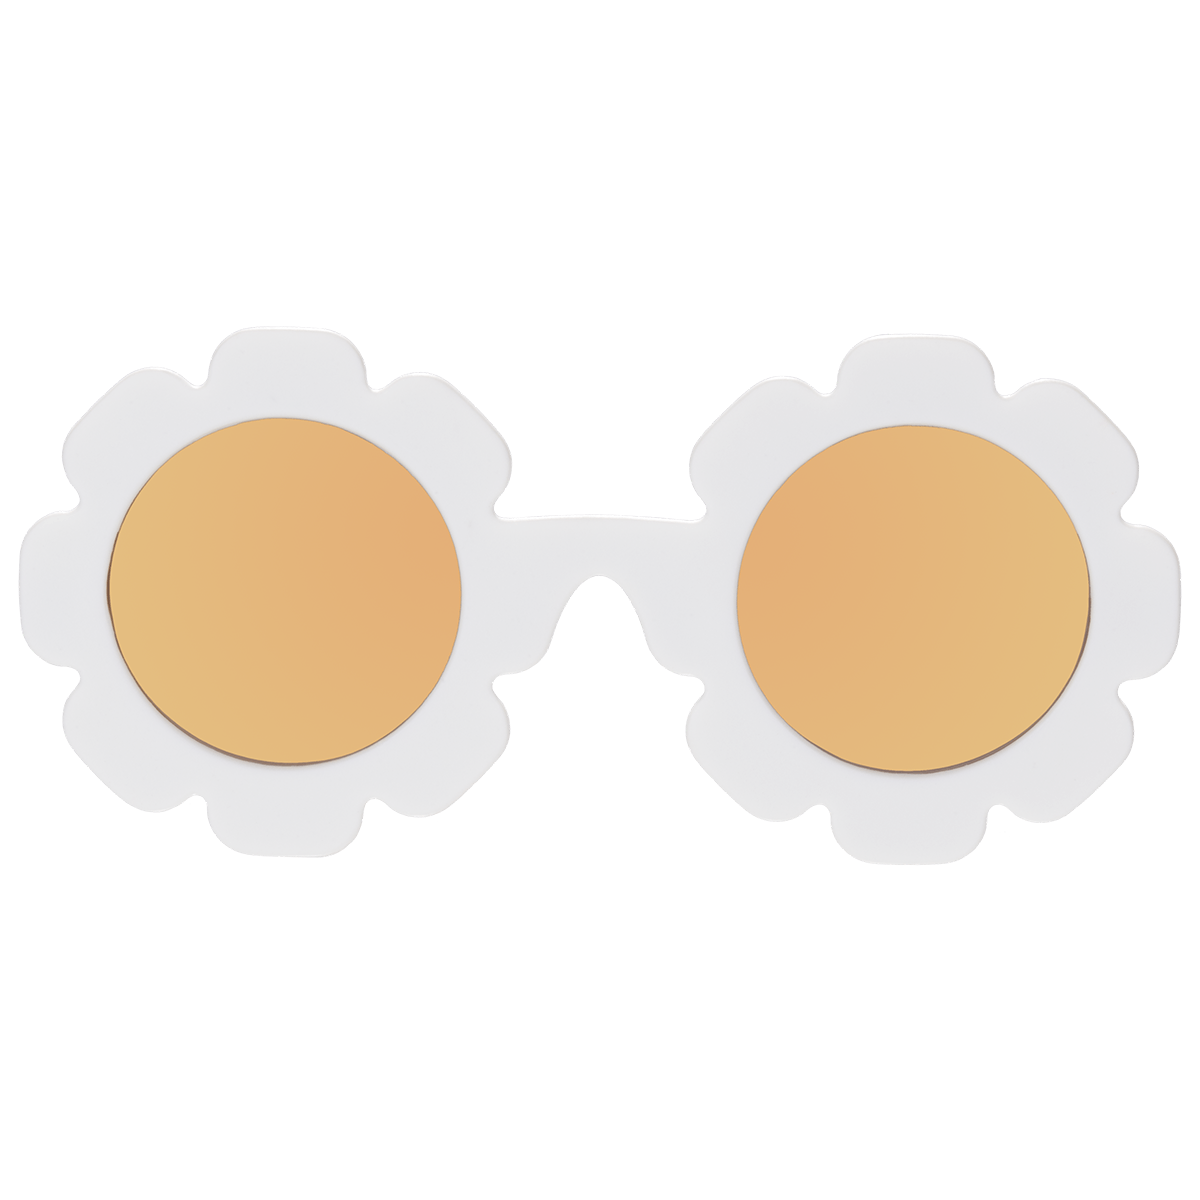 "Daisy" and "Flower Child" Polarized Sunglasses, White or Peach